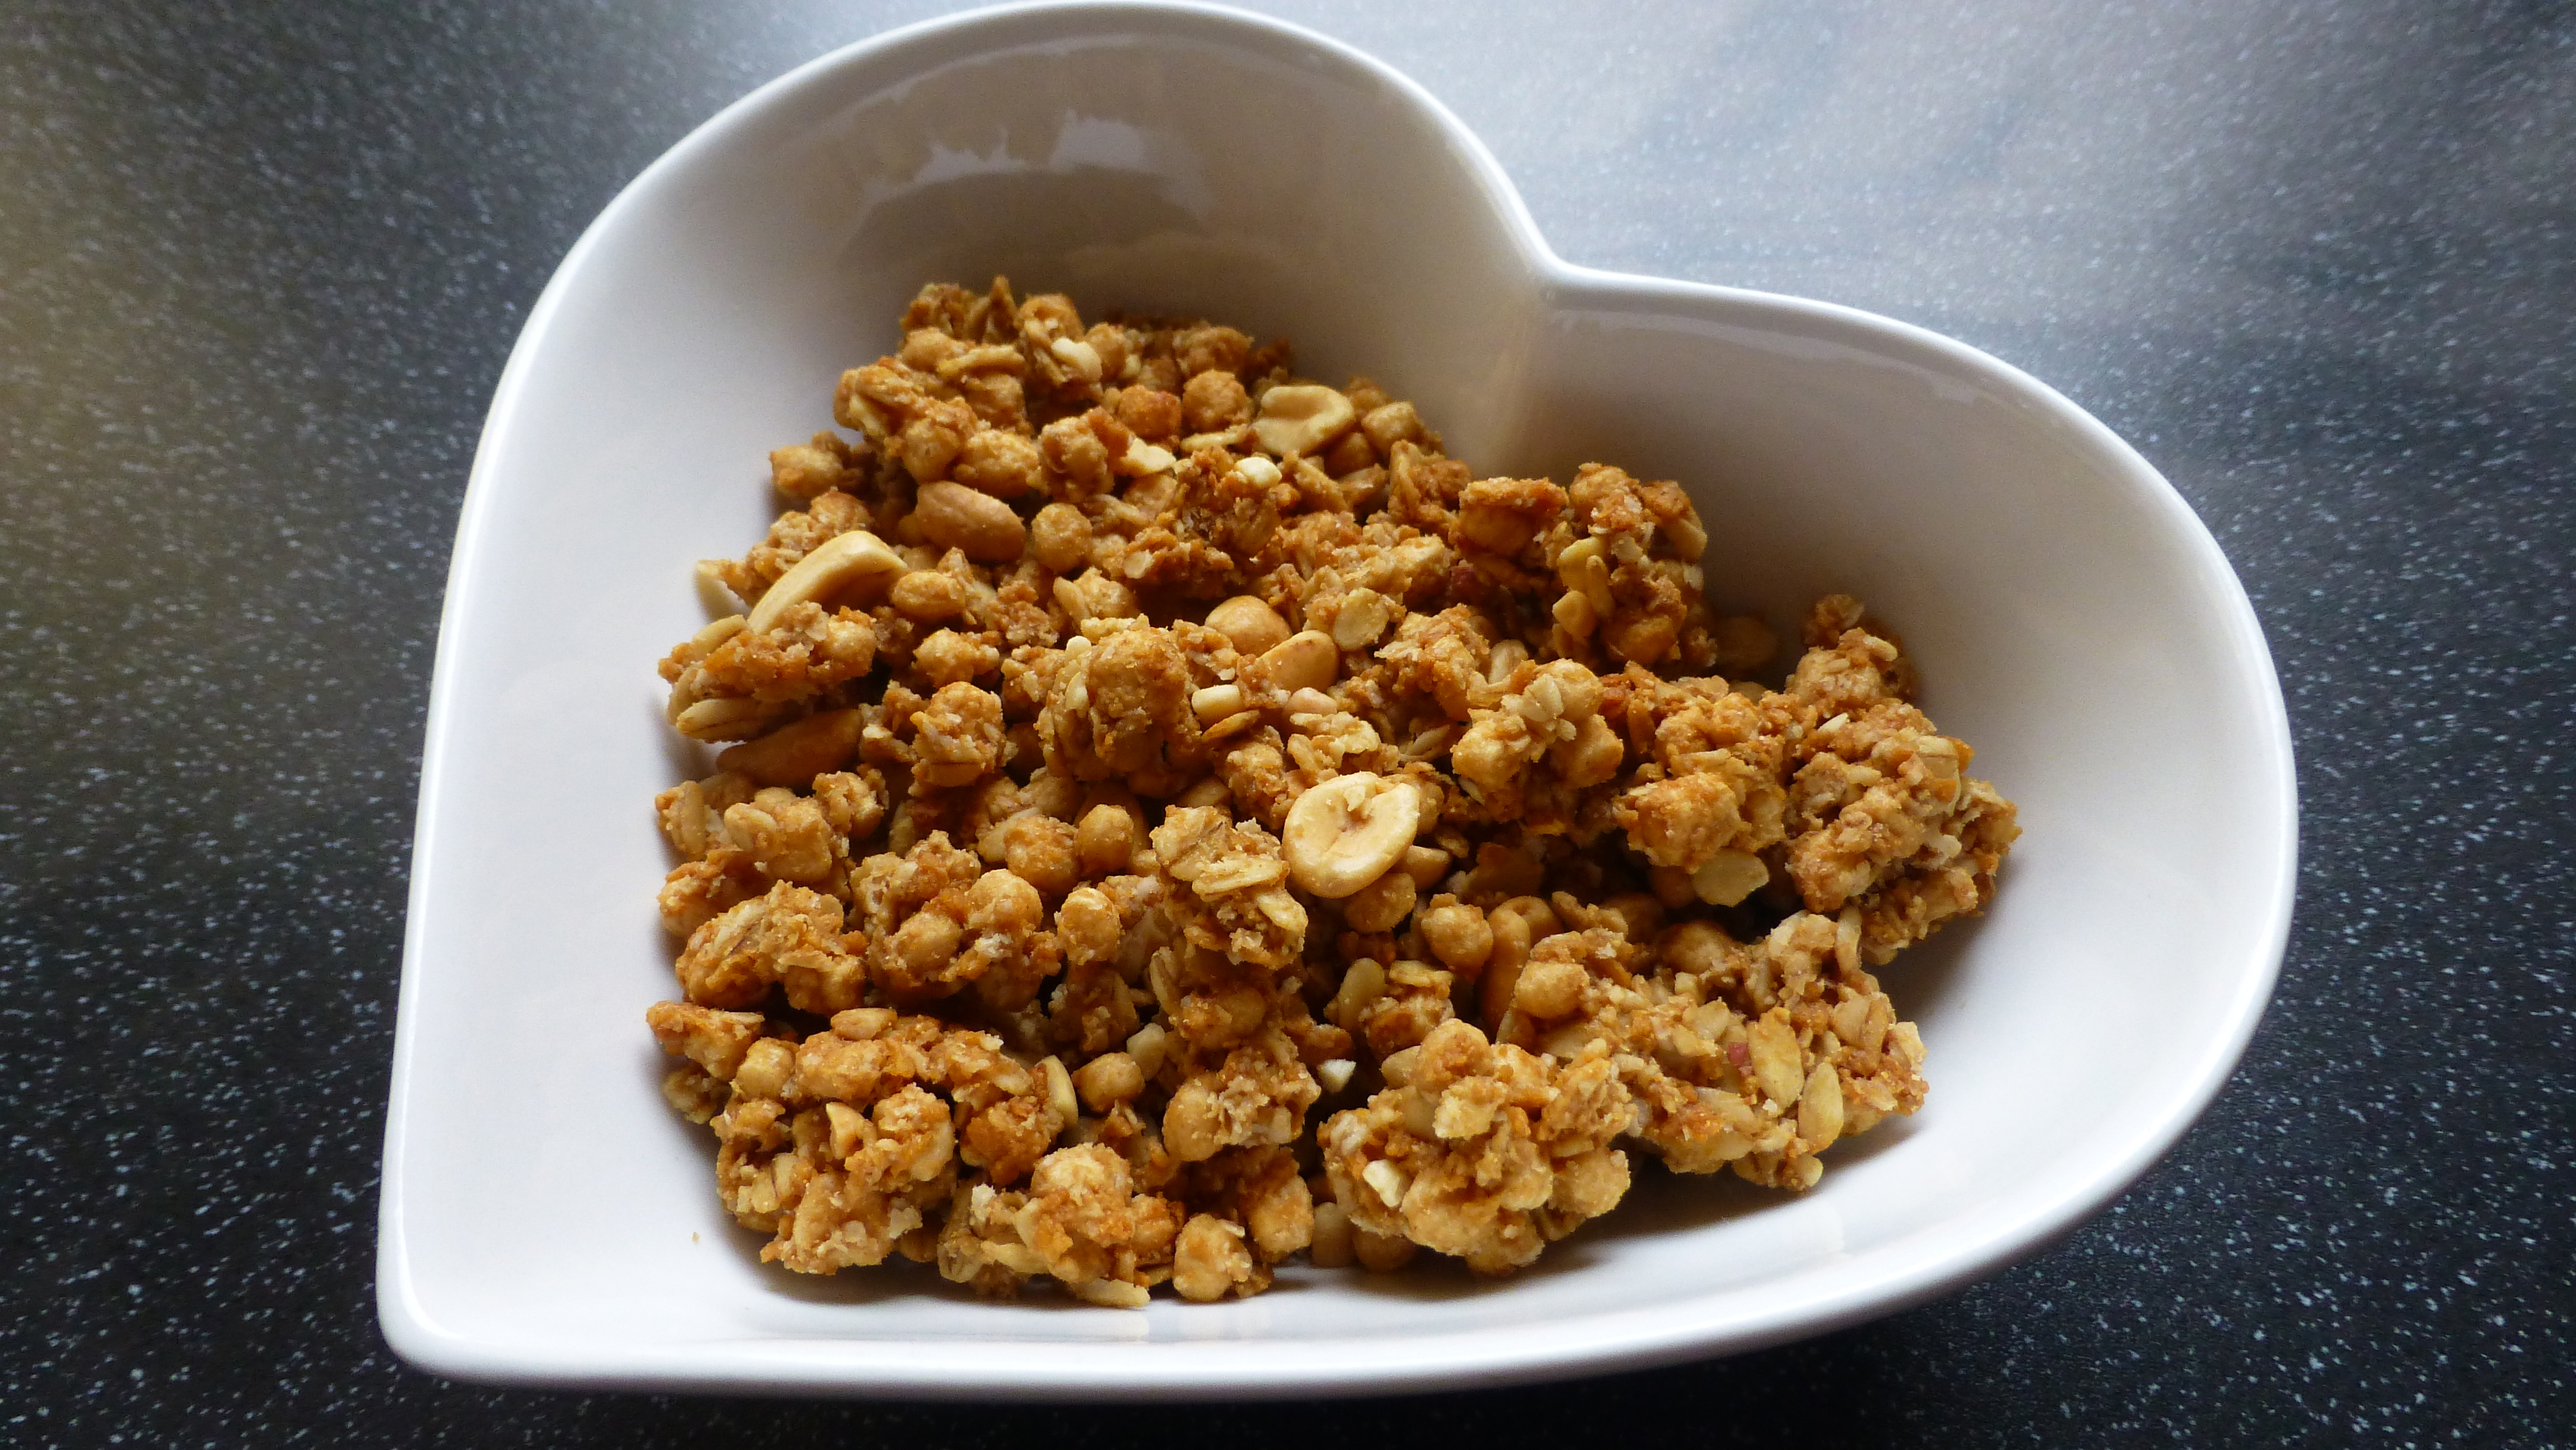 Spooned & Spotted (UK): Crunchy Nut Peanut Butter Clusters Cereal